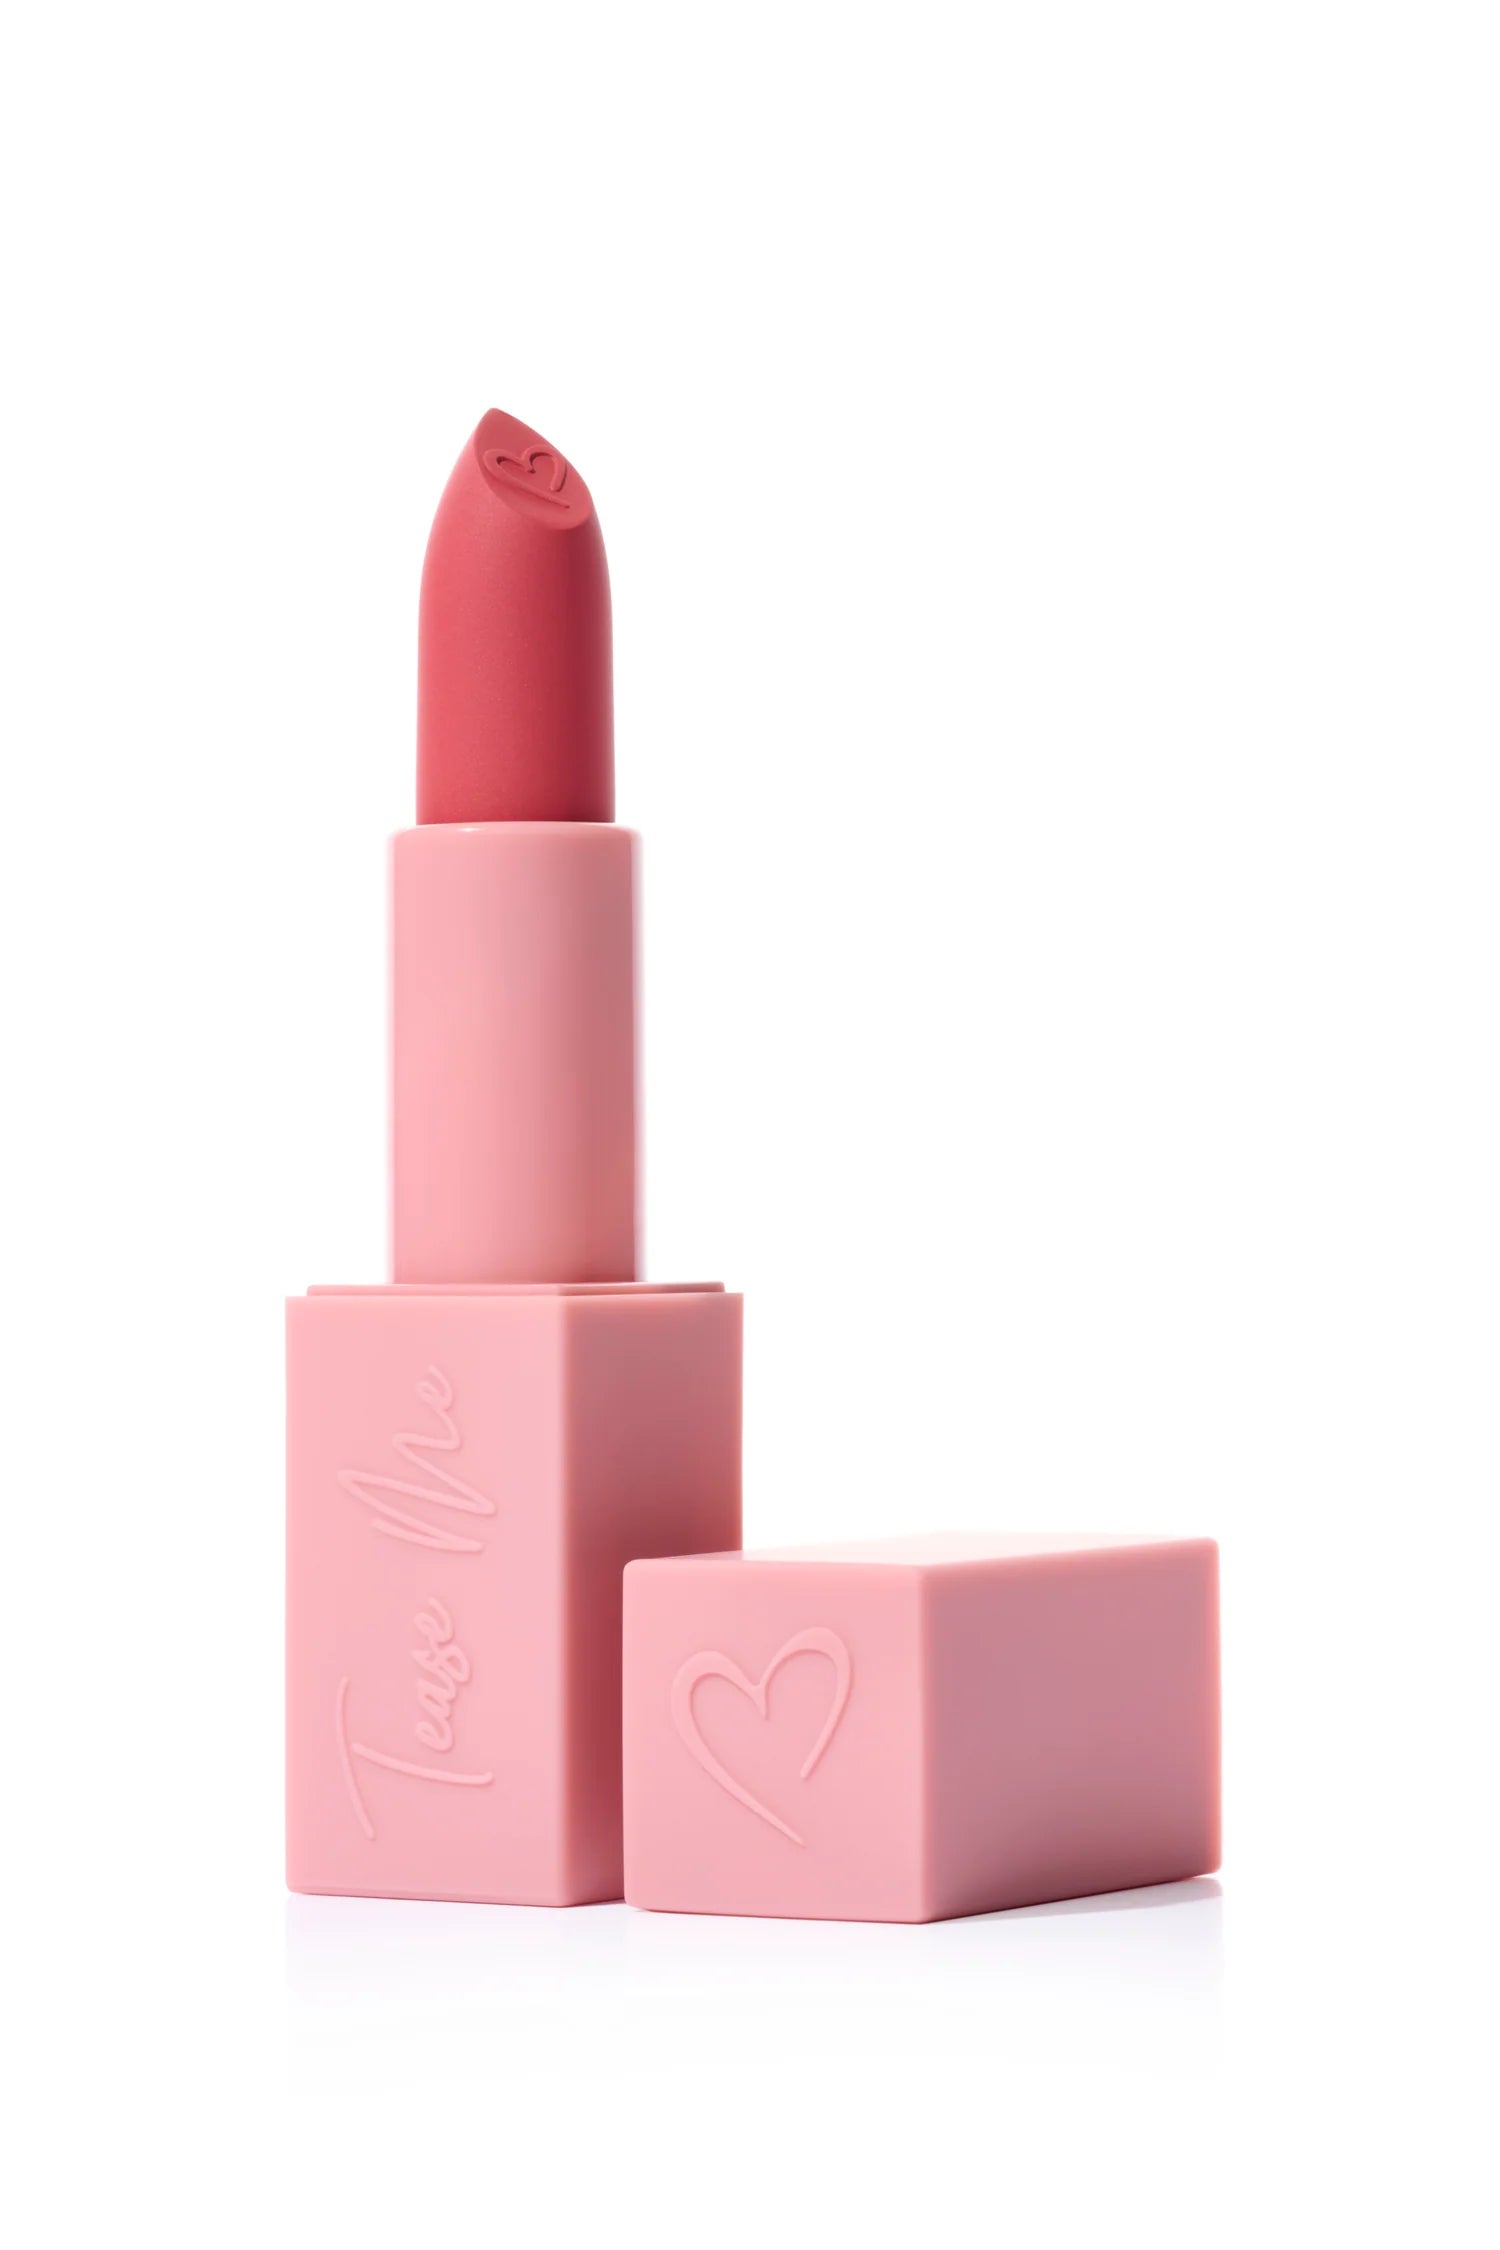 Beauty Creations - Tease Me Collection Lipstick - So Luscious